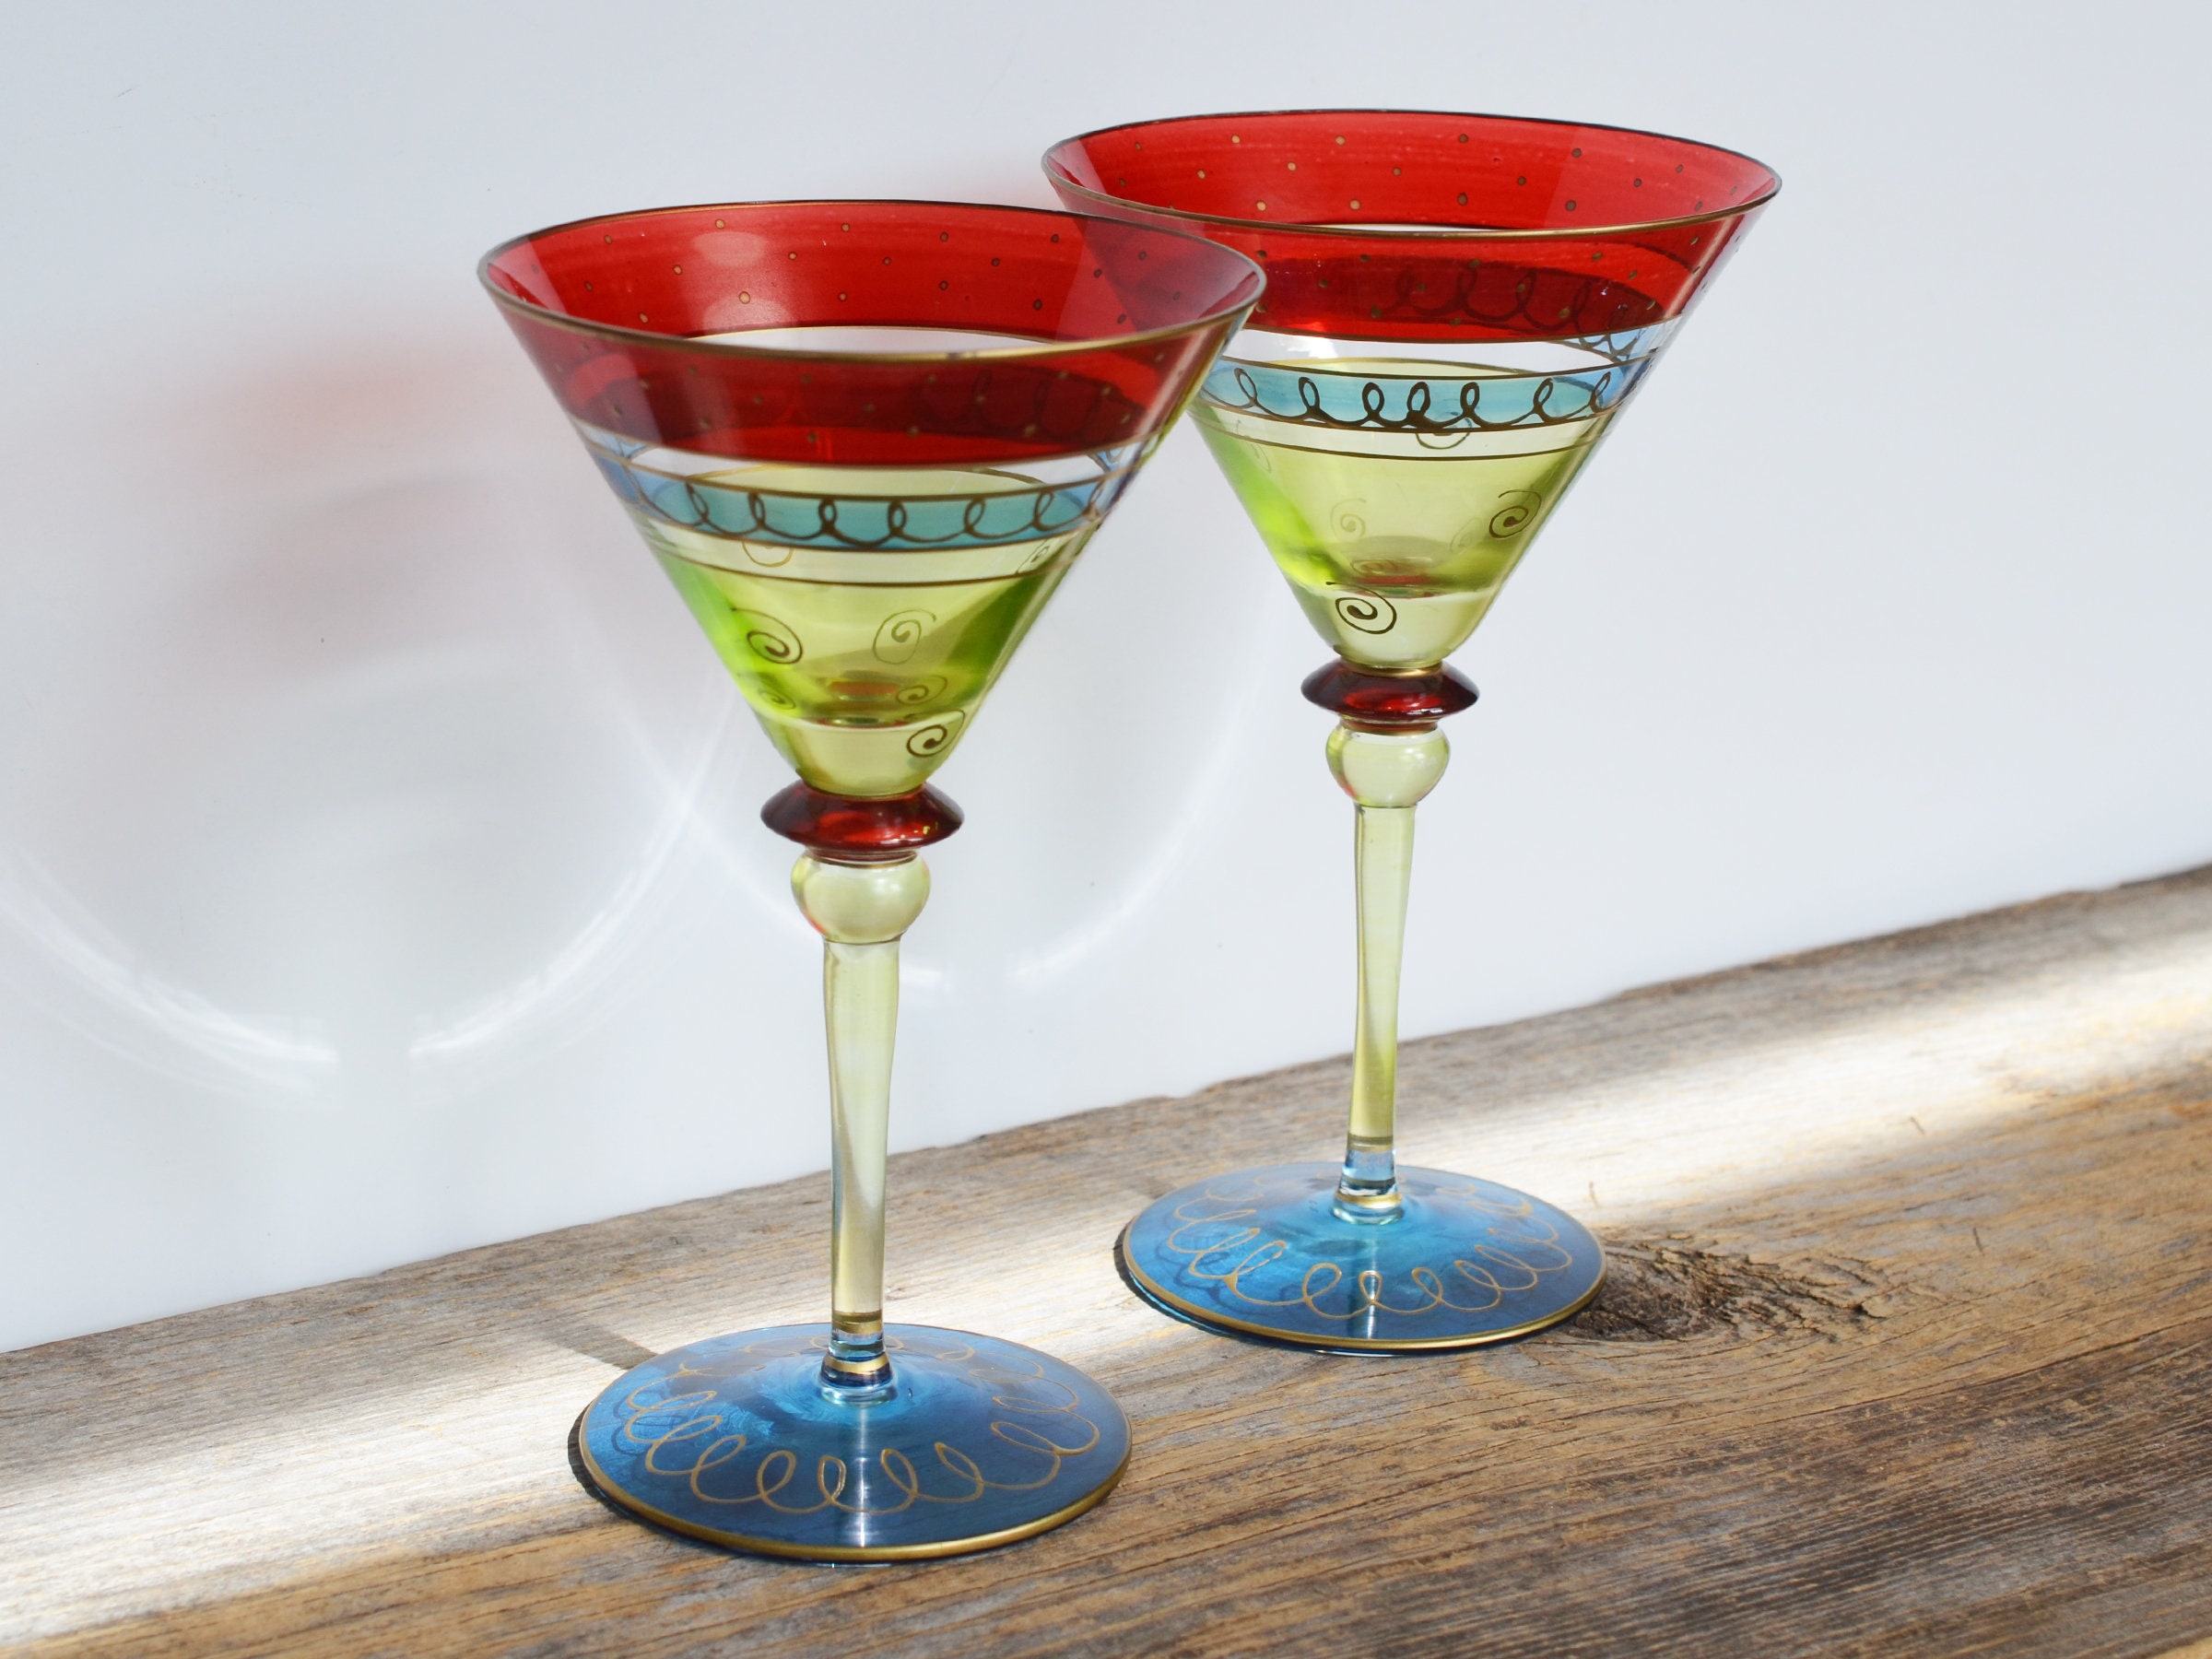 Set of 4  Crystal Martini Glass Etched with Monogram, 10 oz